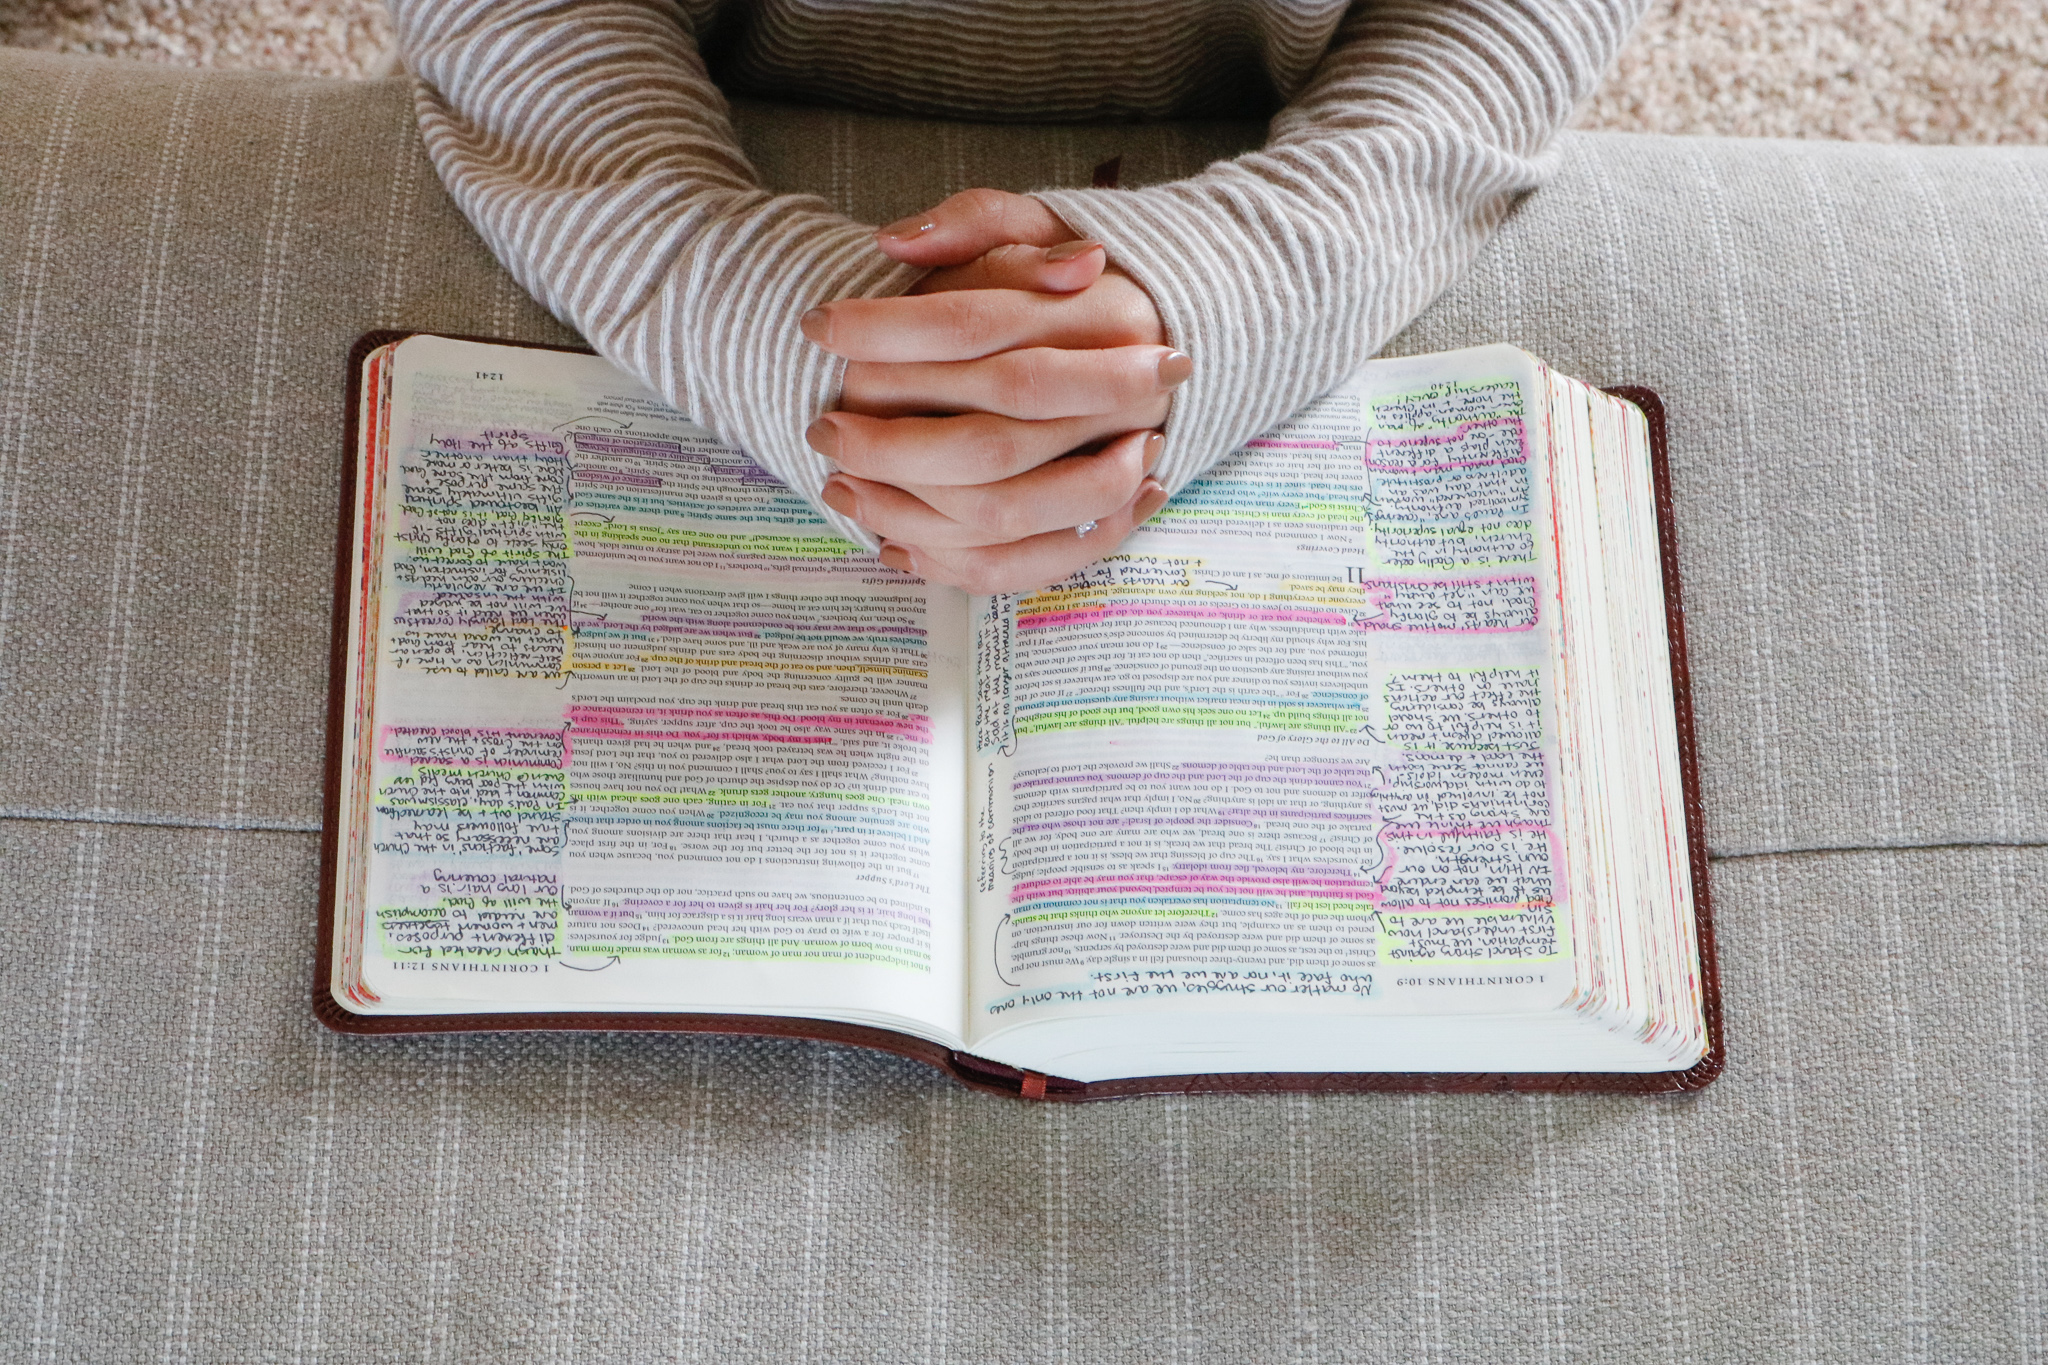 How to Pray the Lord's Prayer: Ways to Say & Use This Prayer